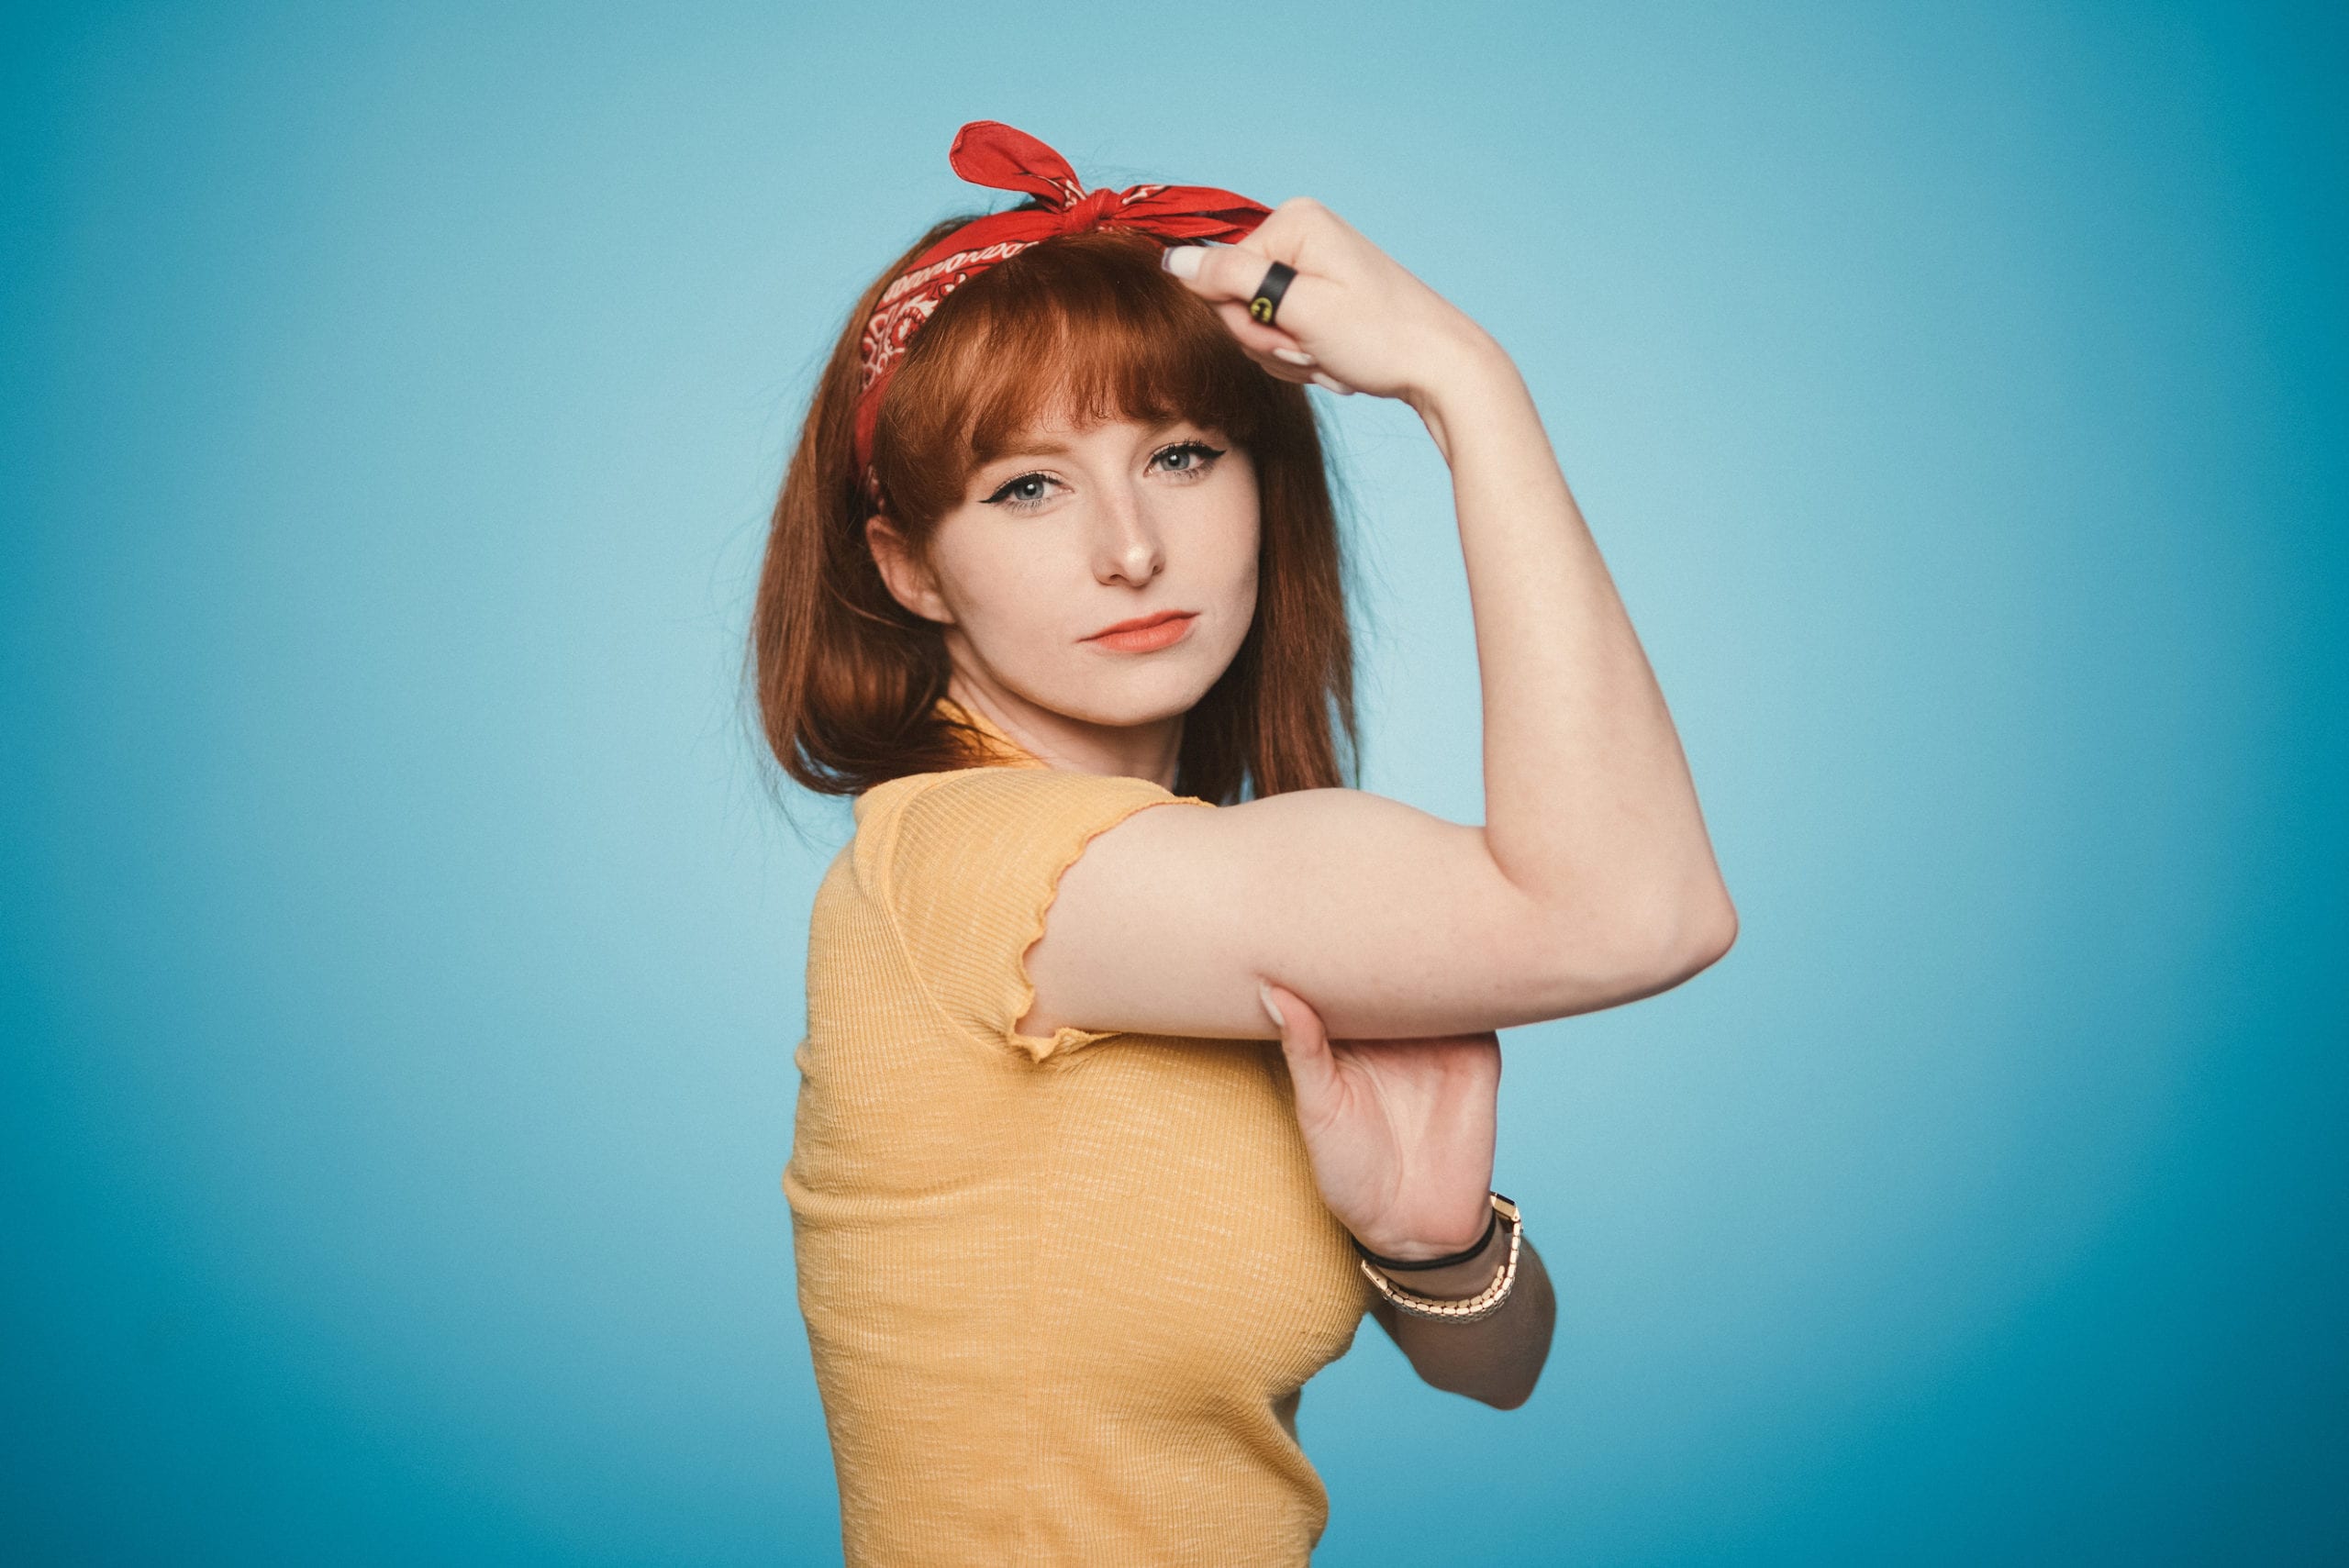 IU C&I Studios Portfolio Heart Piece Media Day Woman with short hazel hair with a red ribbon in it doing a Rosie the Riveter pose for the camera with a light blue background